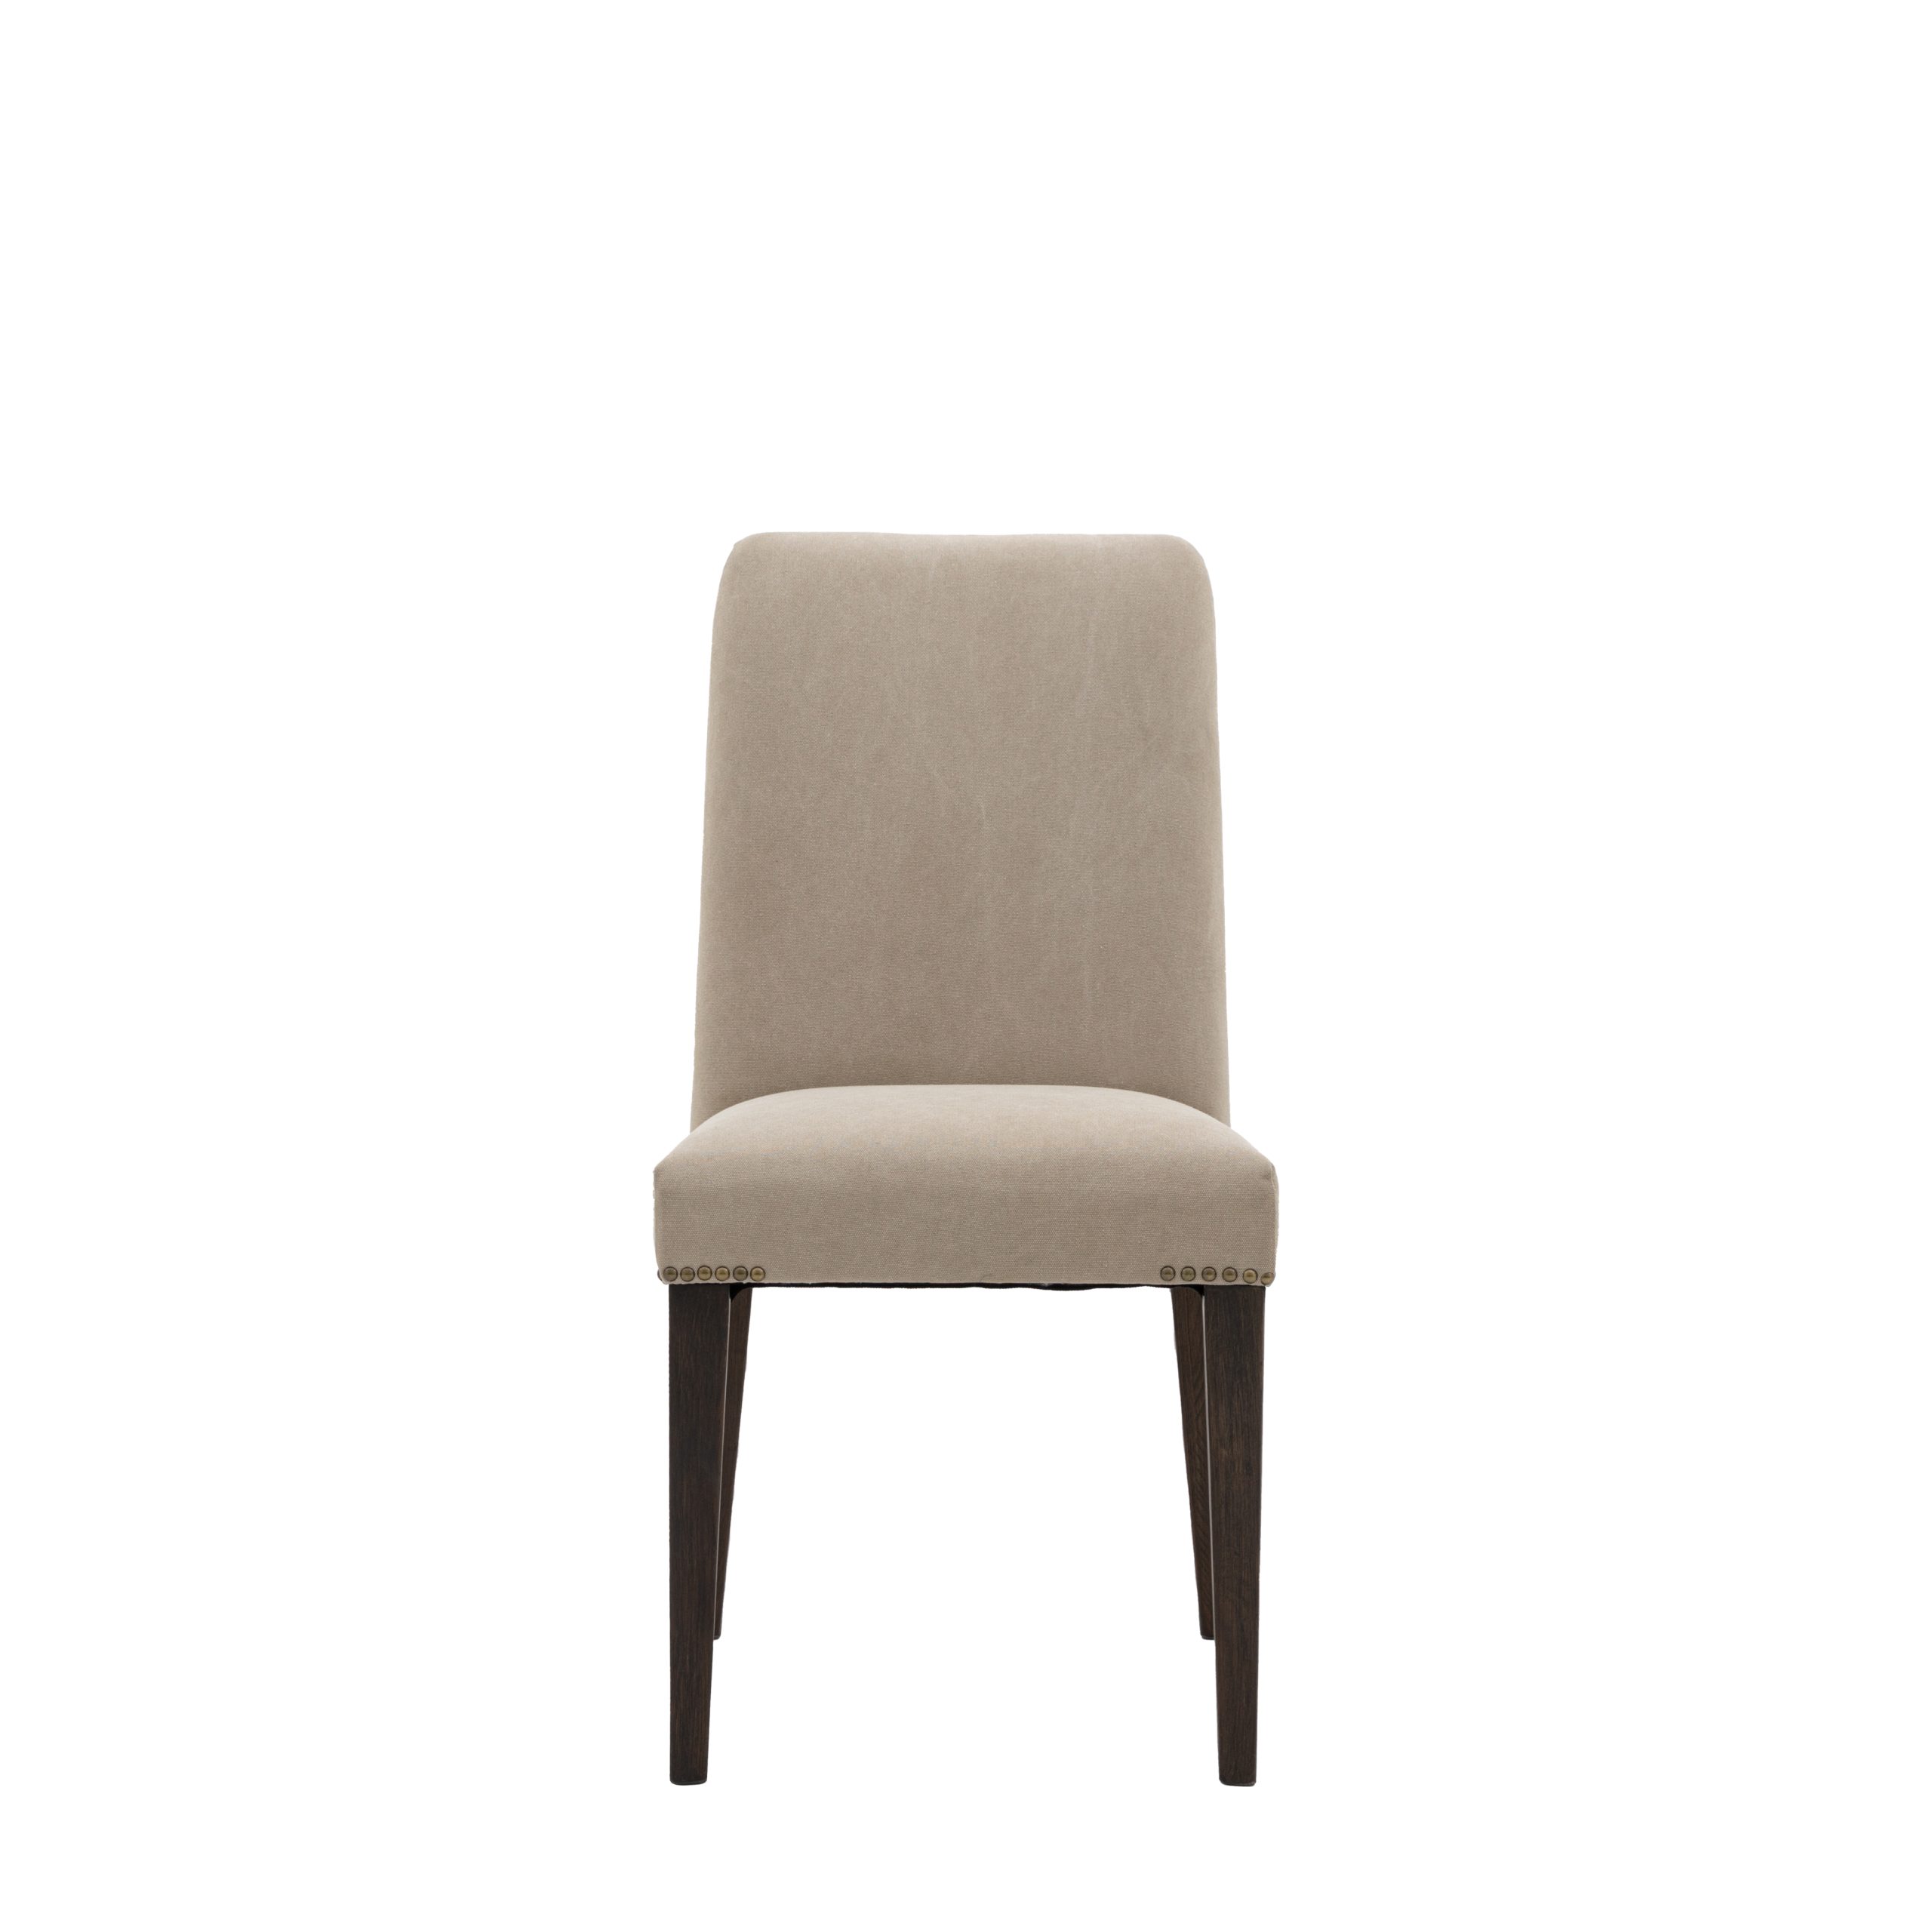 Gallery Direct Madison Chair Cement Linen (Set of 2)